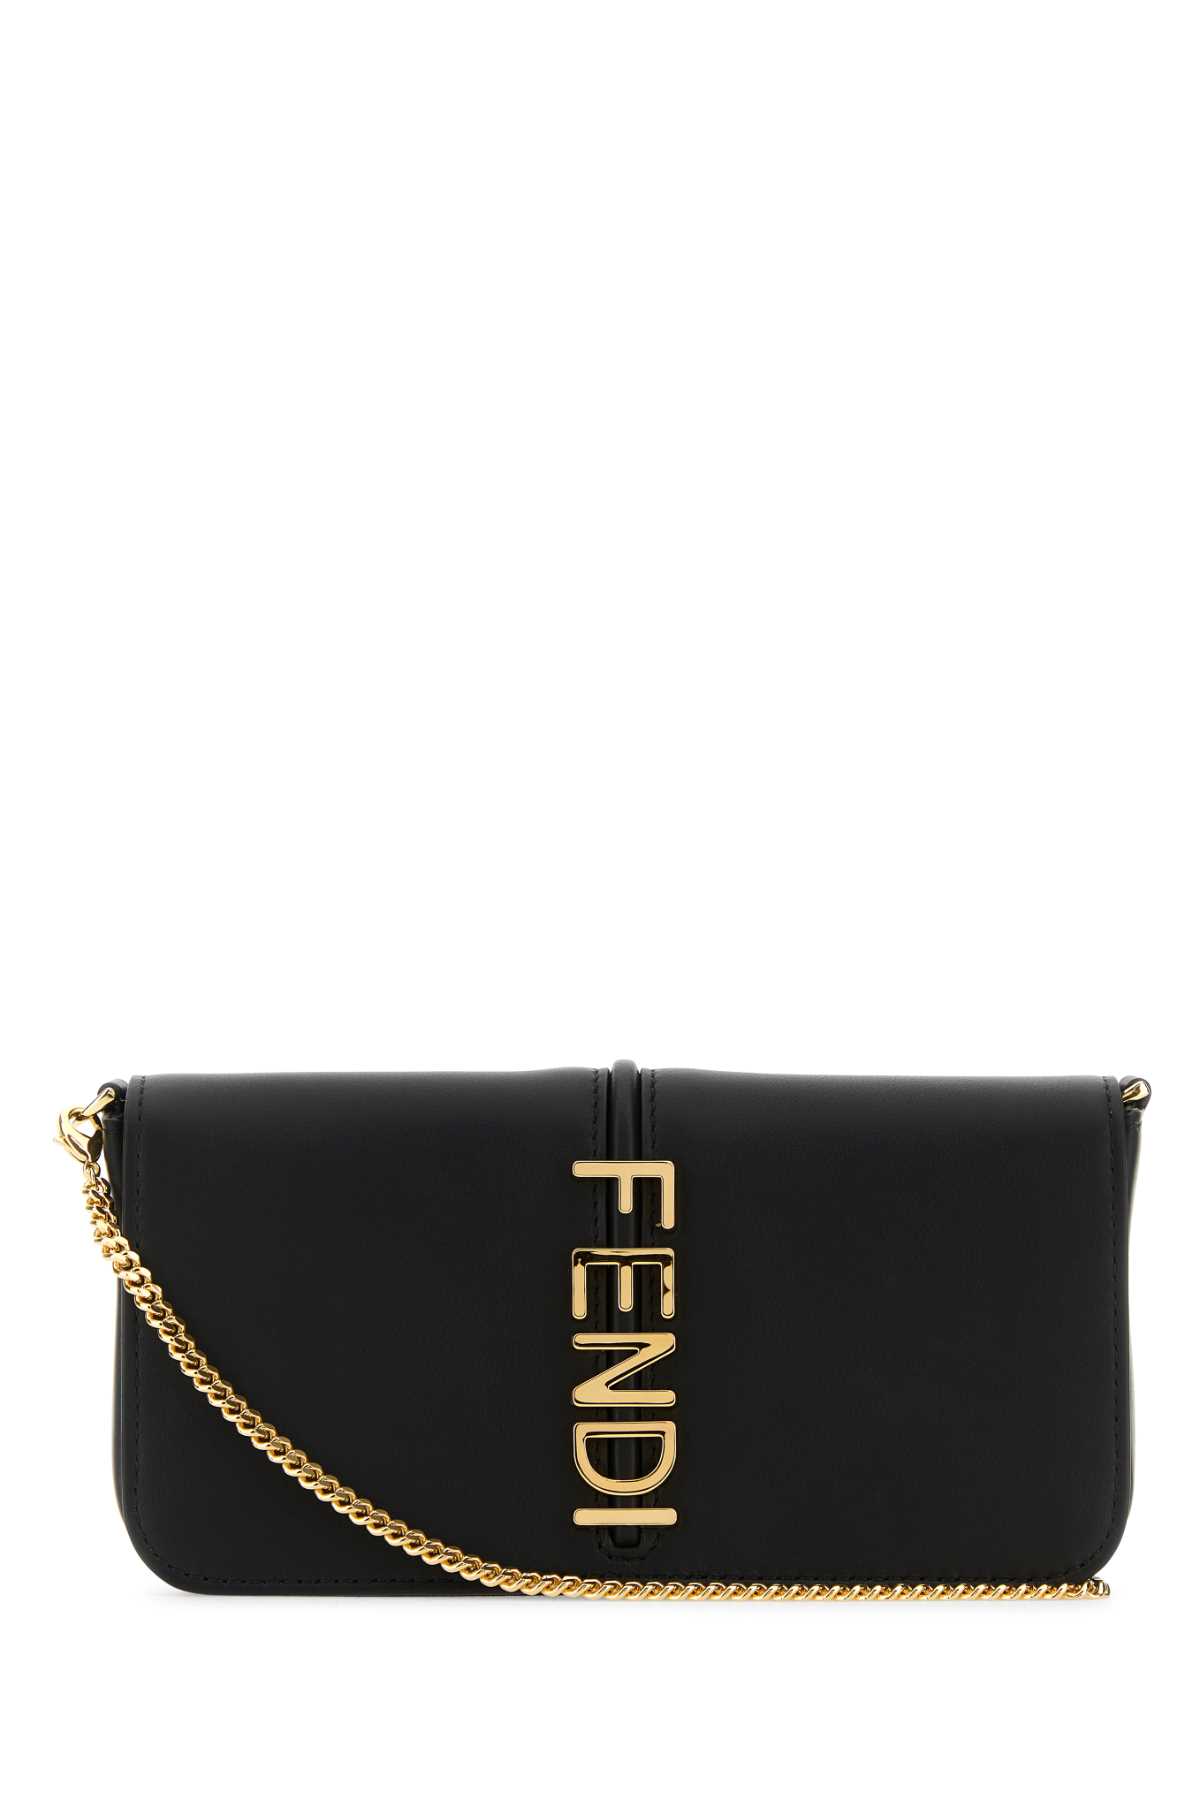 Fendi Black Leather Graphy Wallet In Gold